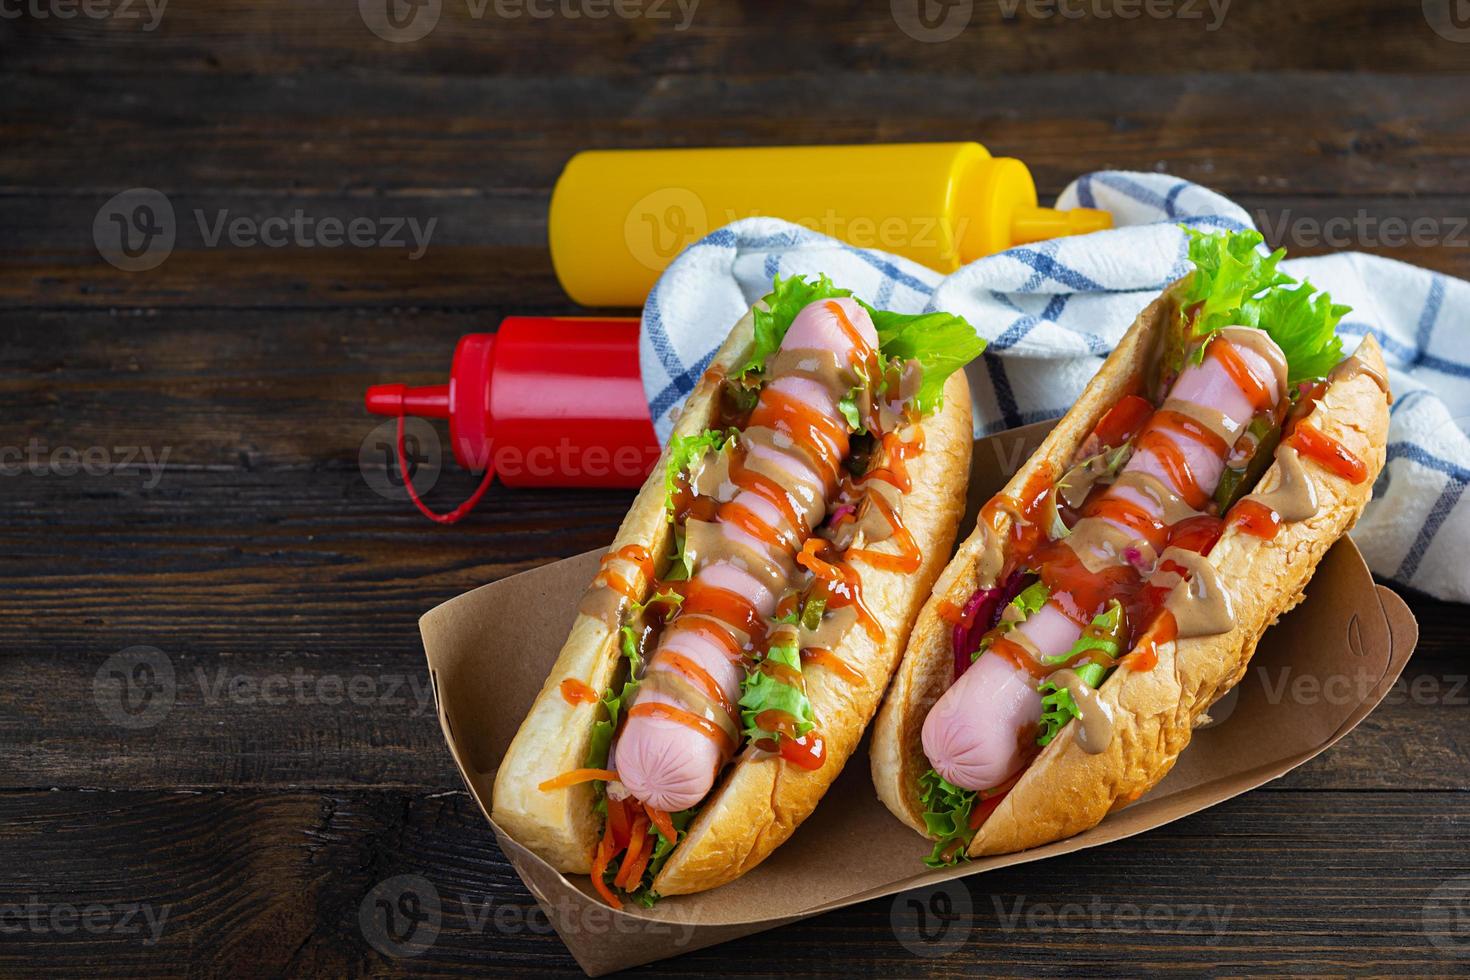 Delicious hot dog with ketchup and mustard on wooden background. Street food photo